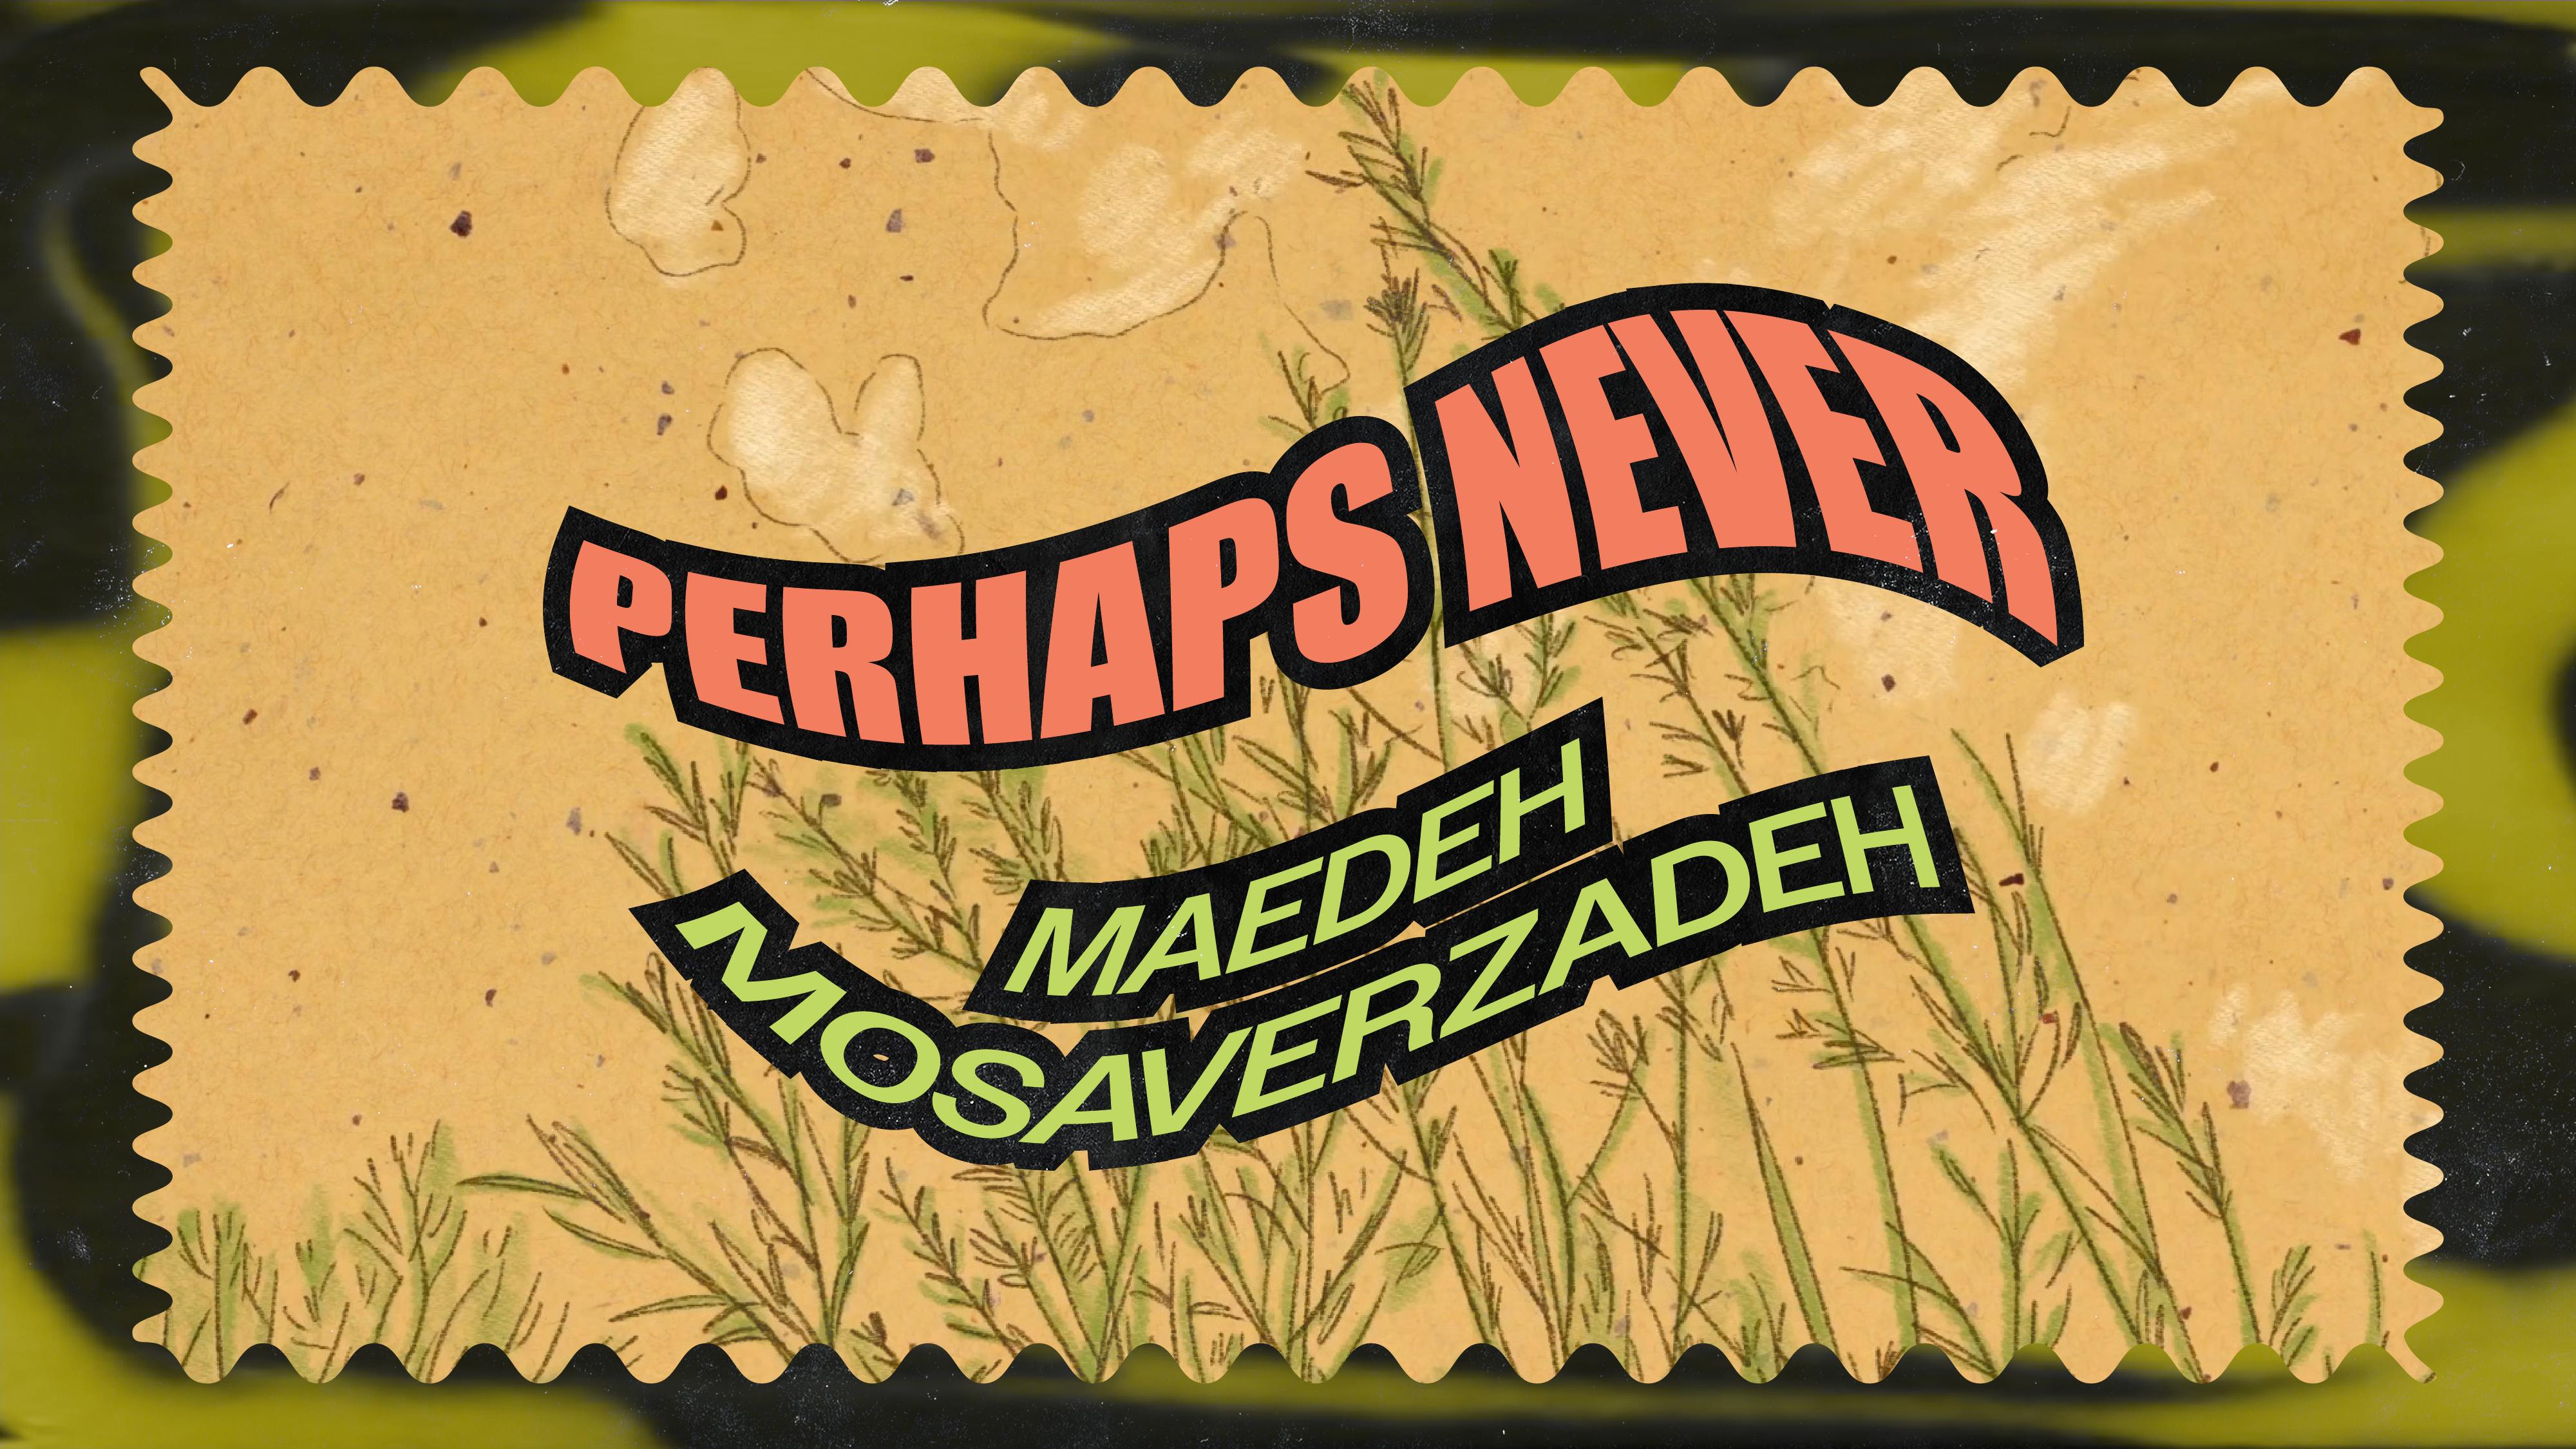 Screenshot from Maedeh Mosaverzadeh's Perhaps Never (2023) - image of grasses blowing in the wind drawn on manila paper. Bordered by the QAS Animation Lockdown 2023 colours, and with the words "PERHAPS NEVER MAEDEH MOSAVERZADEH" written on top. 